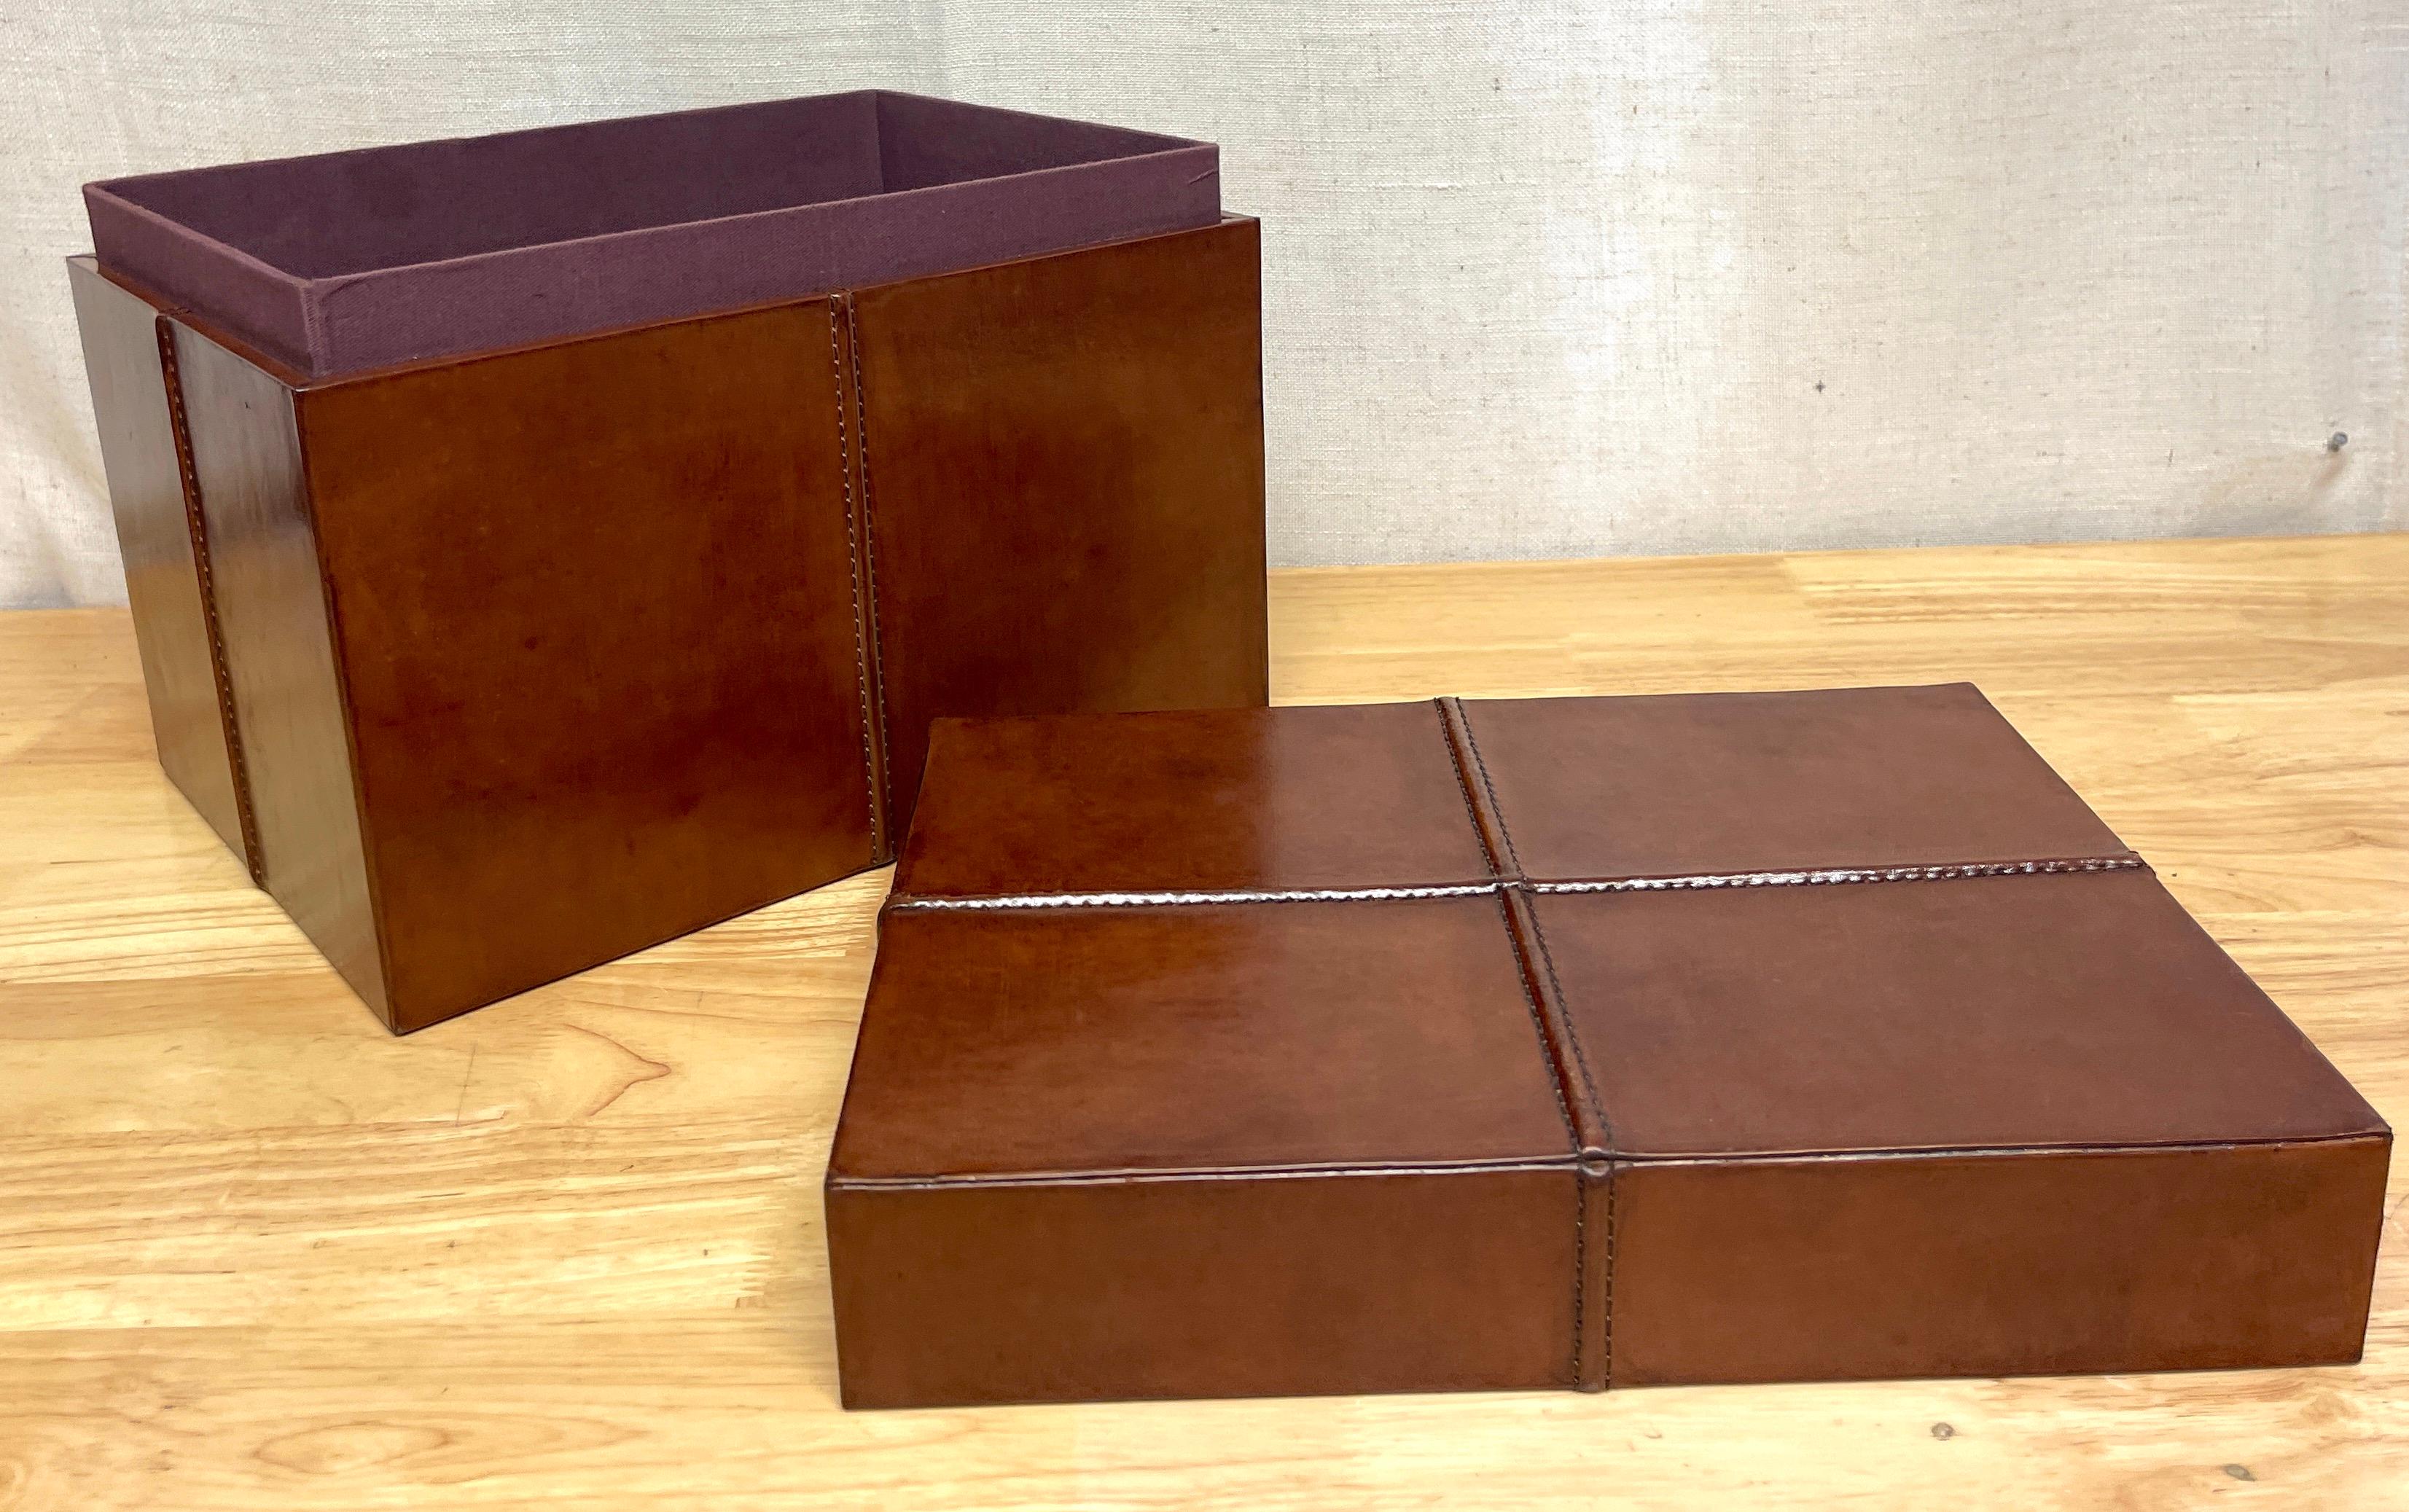 French Modern Stitched Leather Rectangular Table Box In Good Condition For Sale In West Palm Beach, FL